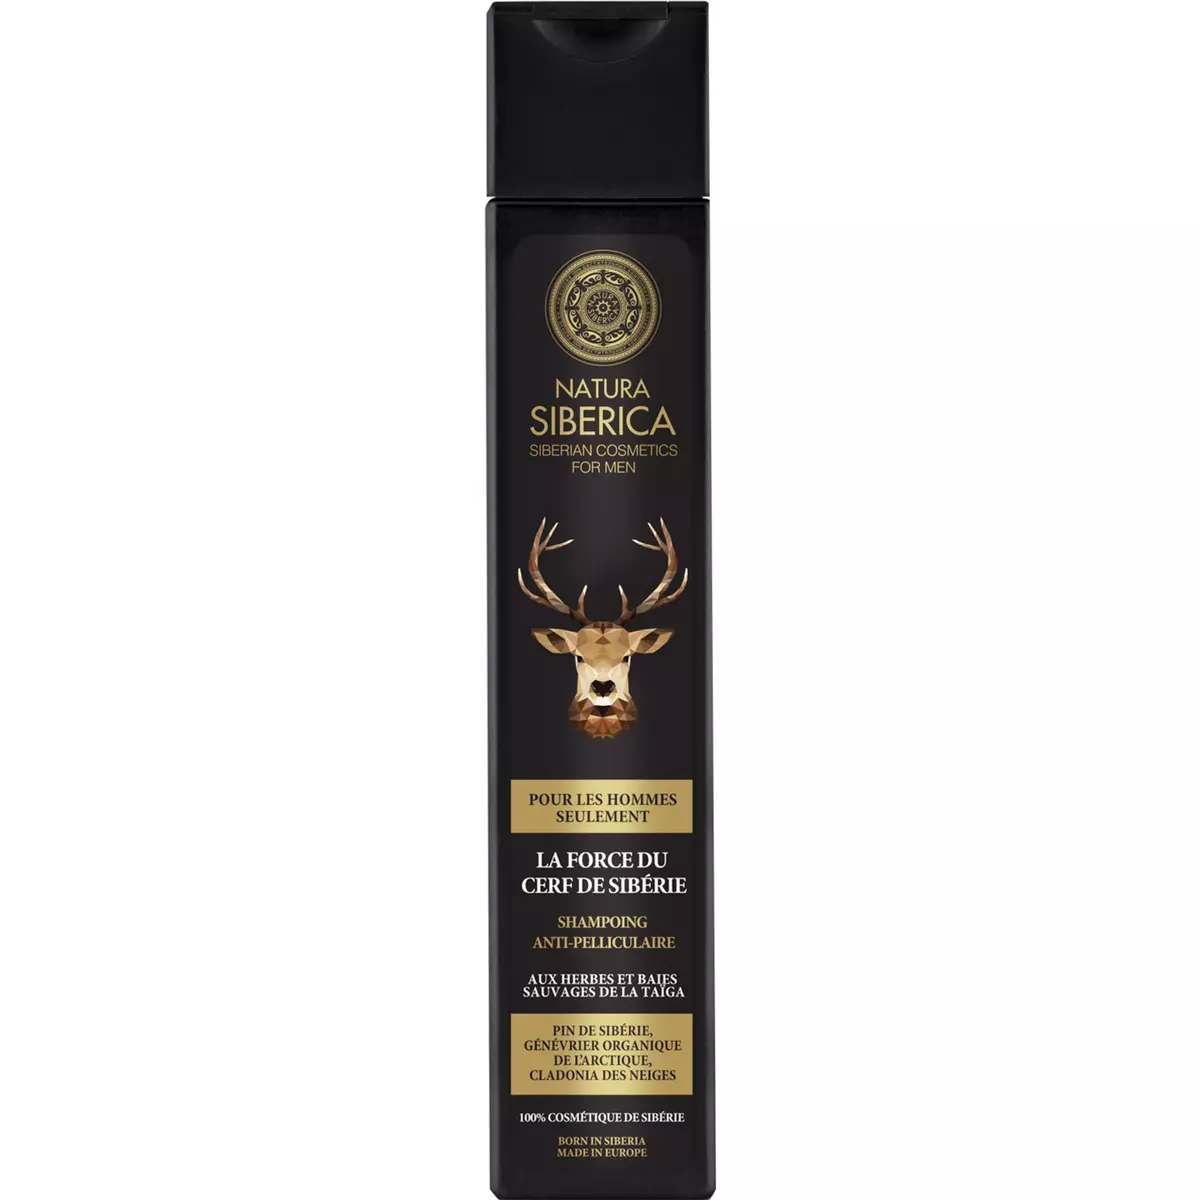 NATURA SIBERICA Shampoing homme anti-pelliculaire herbes & baies sauvages 250ml